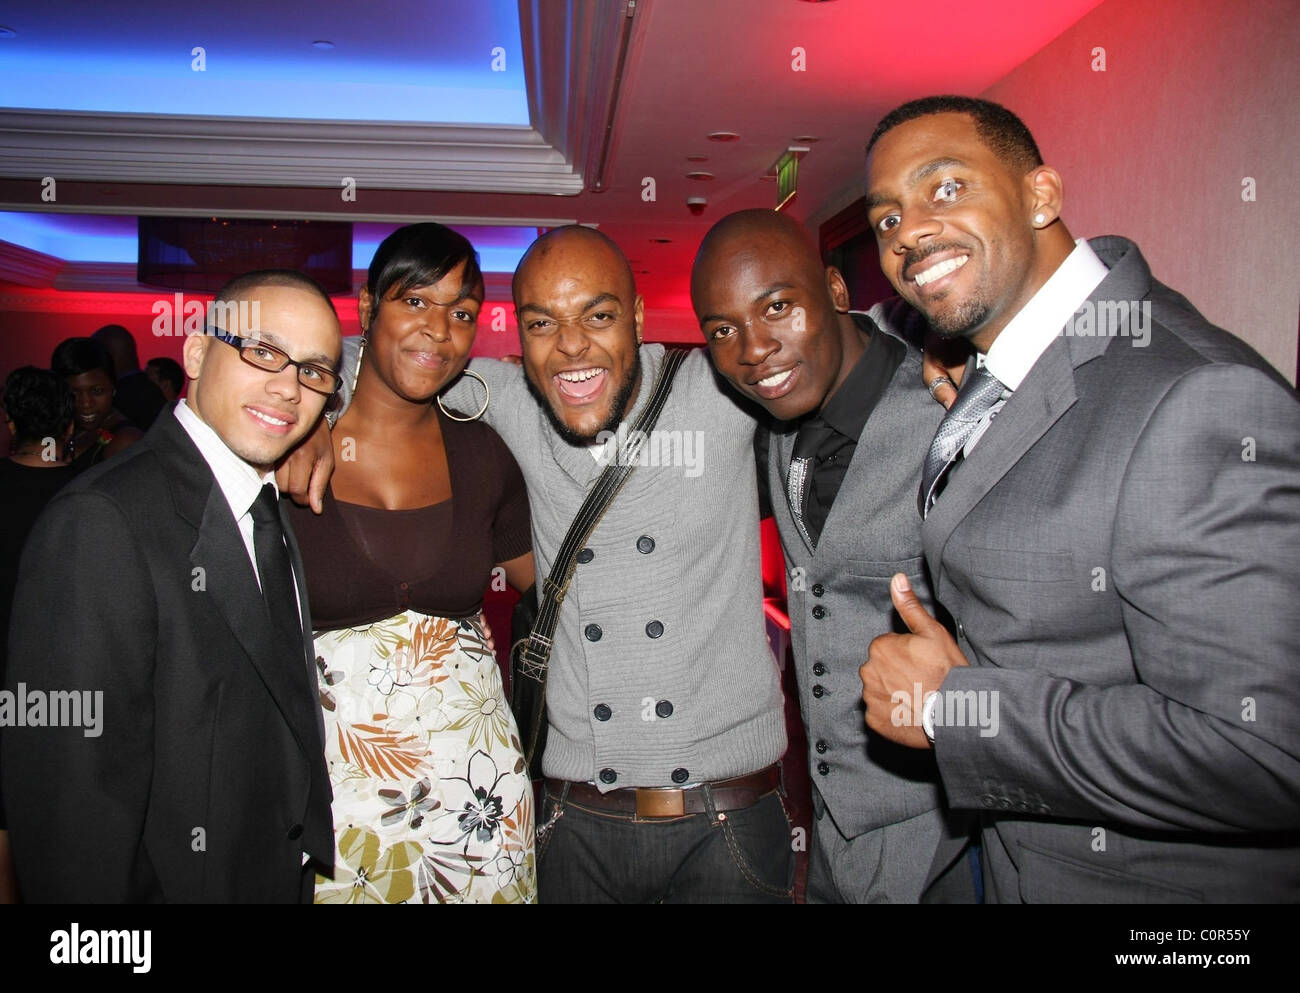 Charlie Denny, Sisiter of Donso, Donso, Eddie Kadi and Richard Blackwood attends the 'Gift of Life Ball' Fundraiser  at the Stock Photo